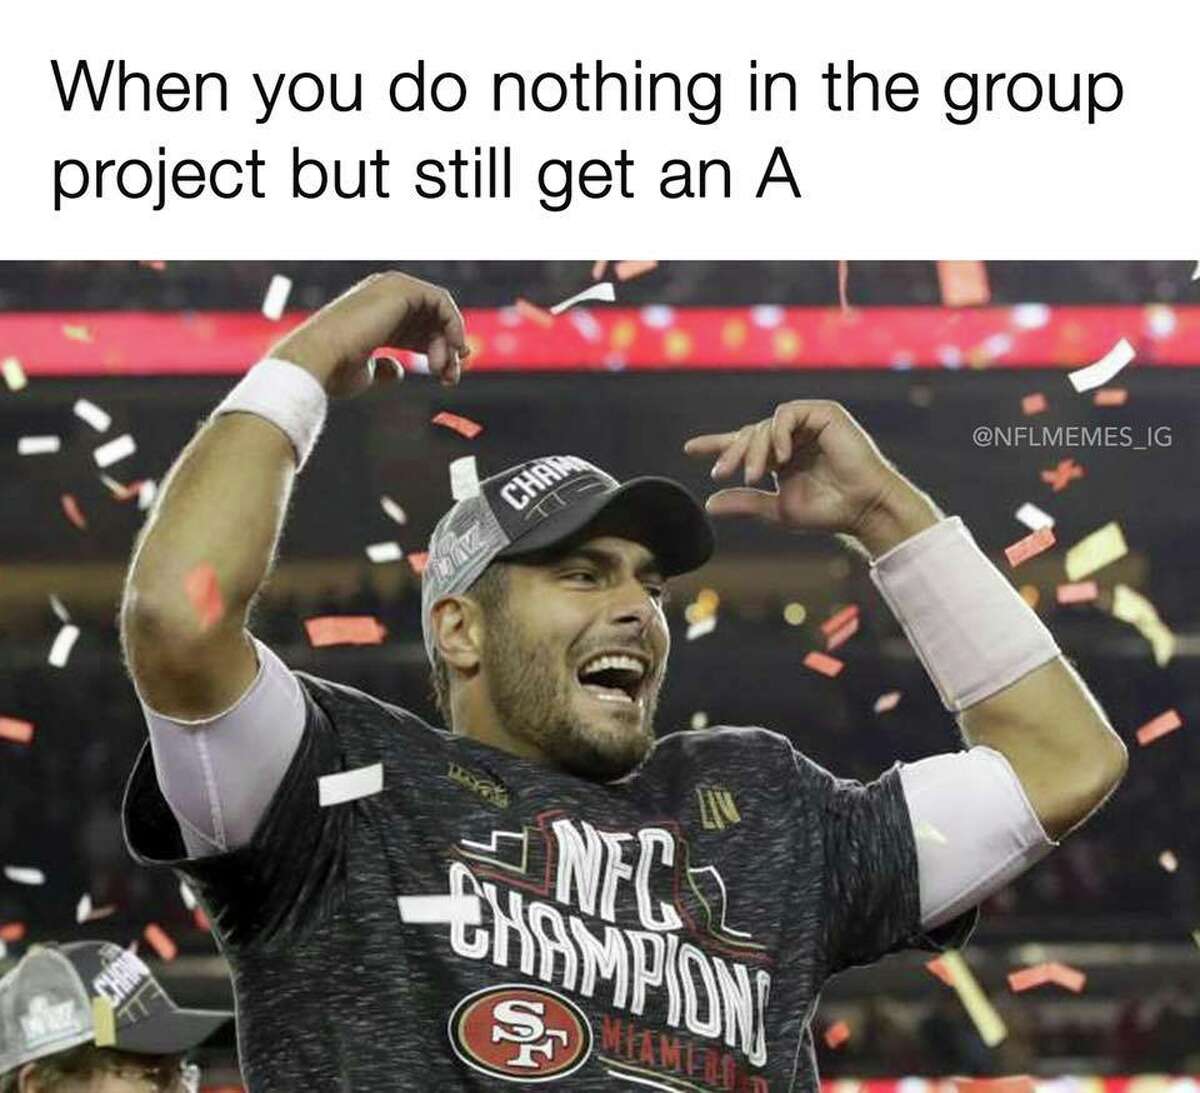 Hilarious memes mock day full of lopsided NFL playoff games